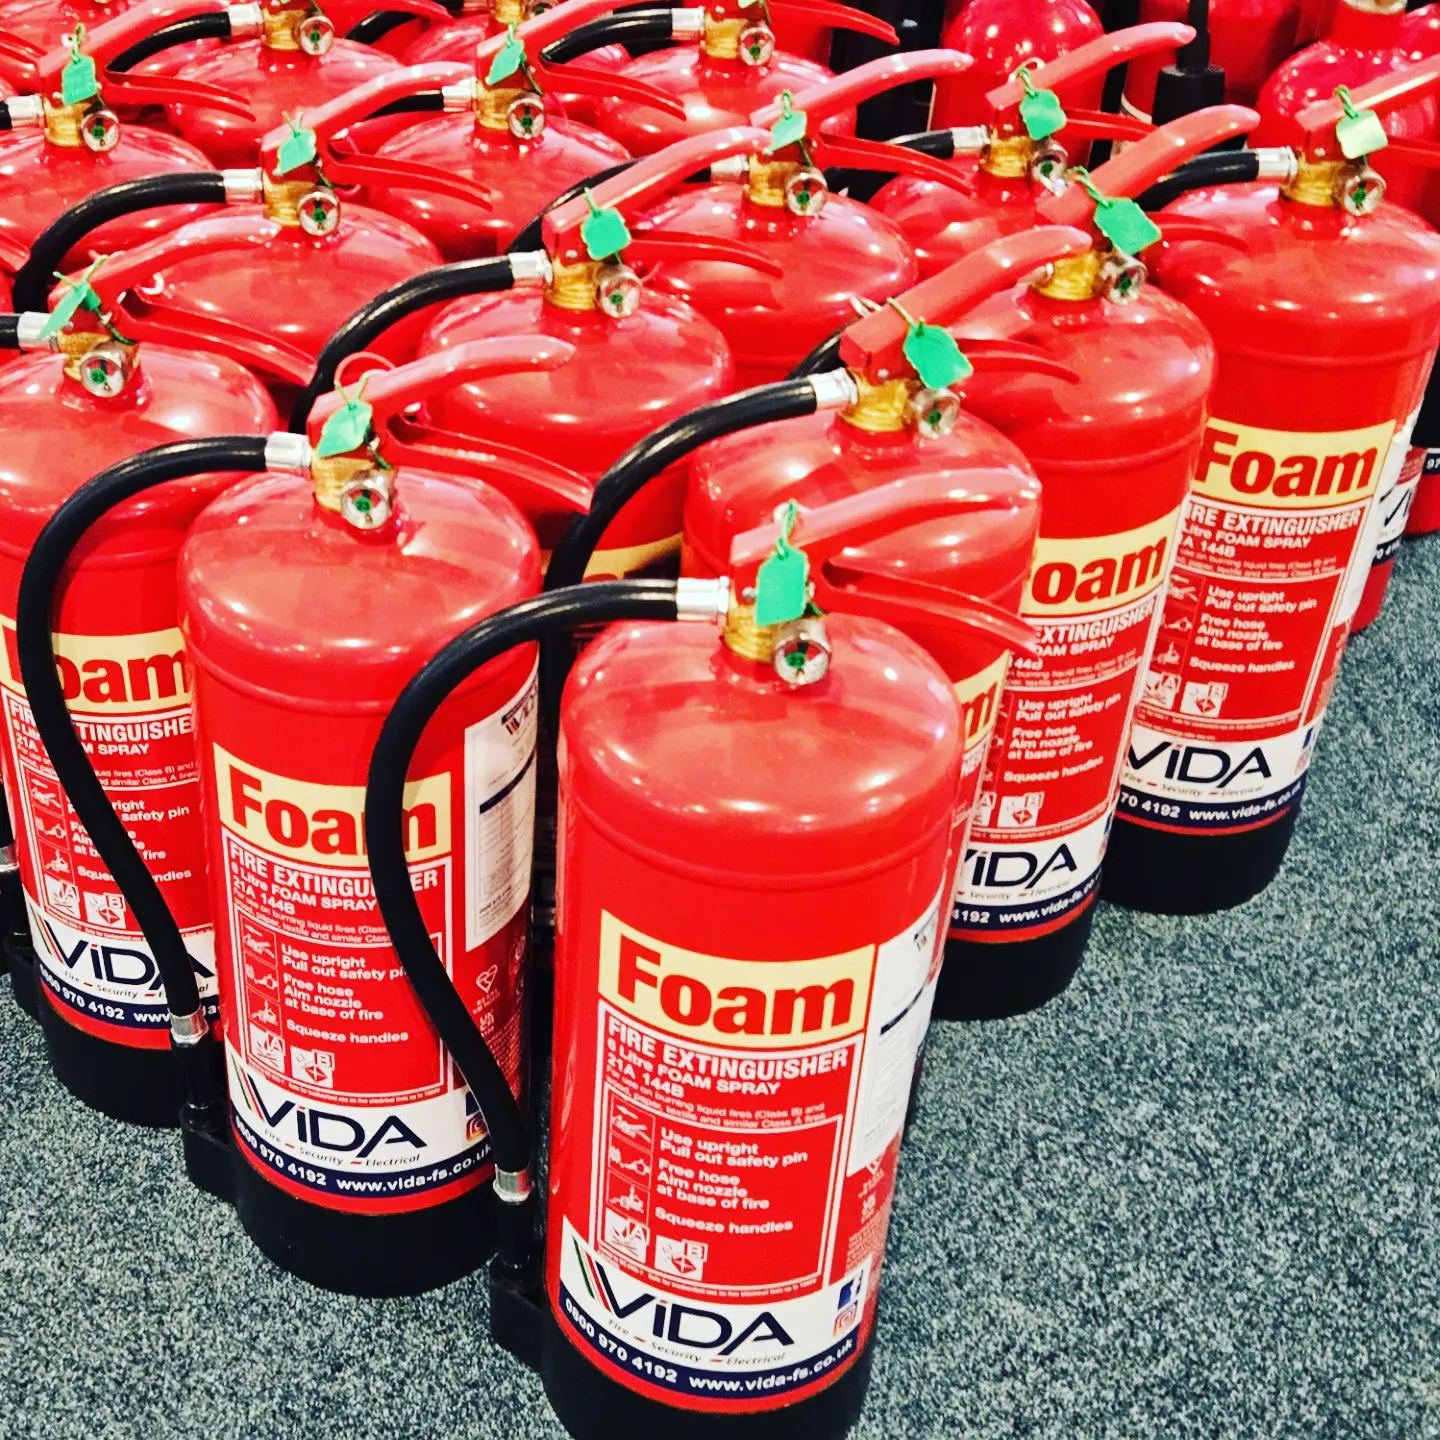 How Do I Know if I Have Enough Fire Extinguishers? - Fire Systems, Inc.